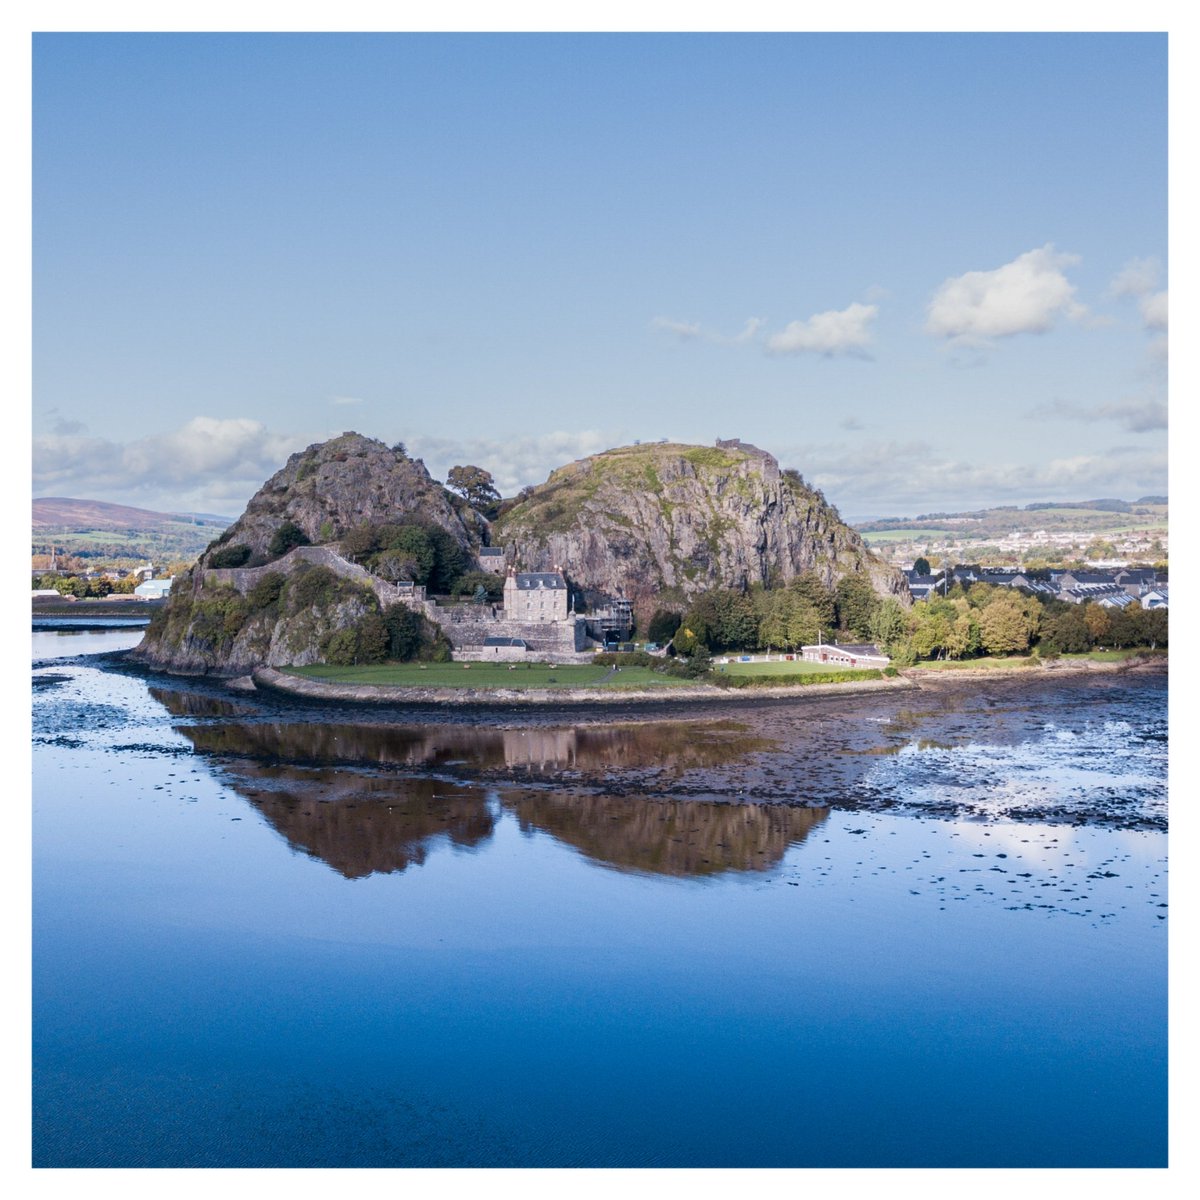 Dumbarton Rock. Scotland. 

Visit LS Production's website to see our huge library of locations. 

lsproductions.com/locations

#location #locationscout #locationscouting #filmset  #photography #photographylovers  #LSProductions #LSFilms #Scotland #drone #djimavicpro #dji #cinematic